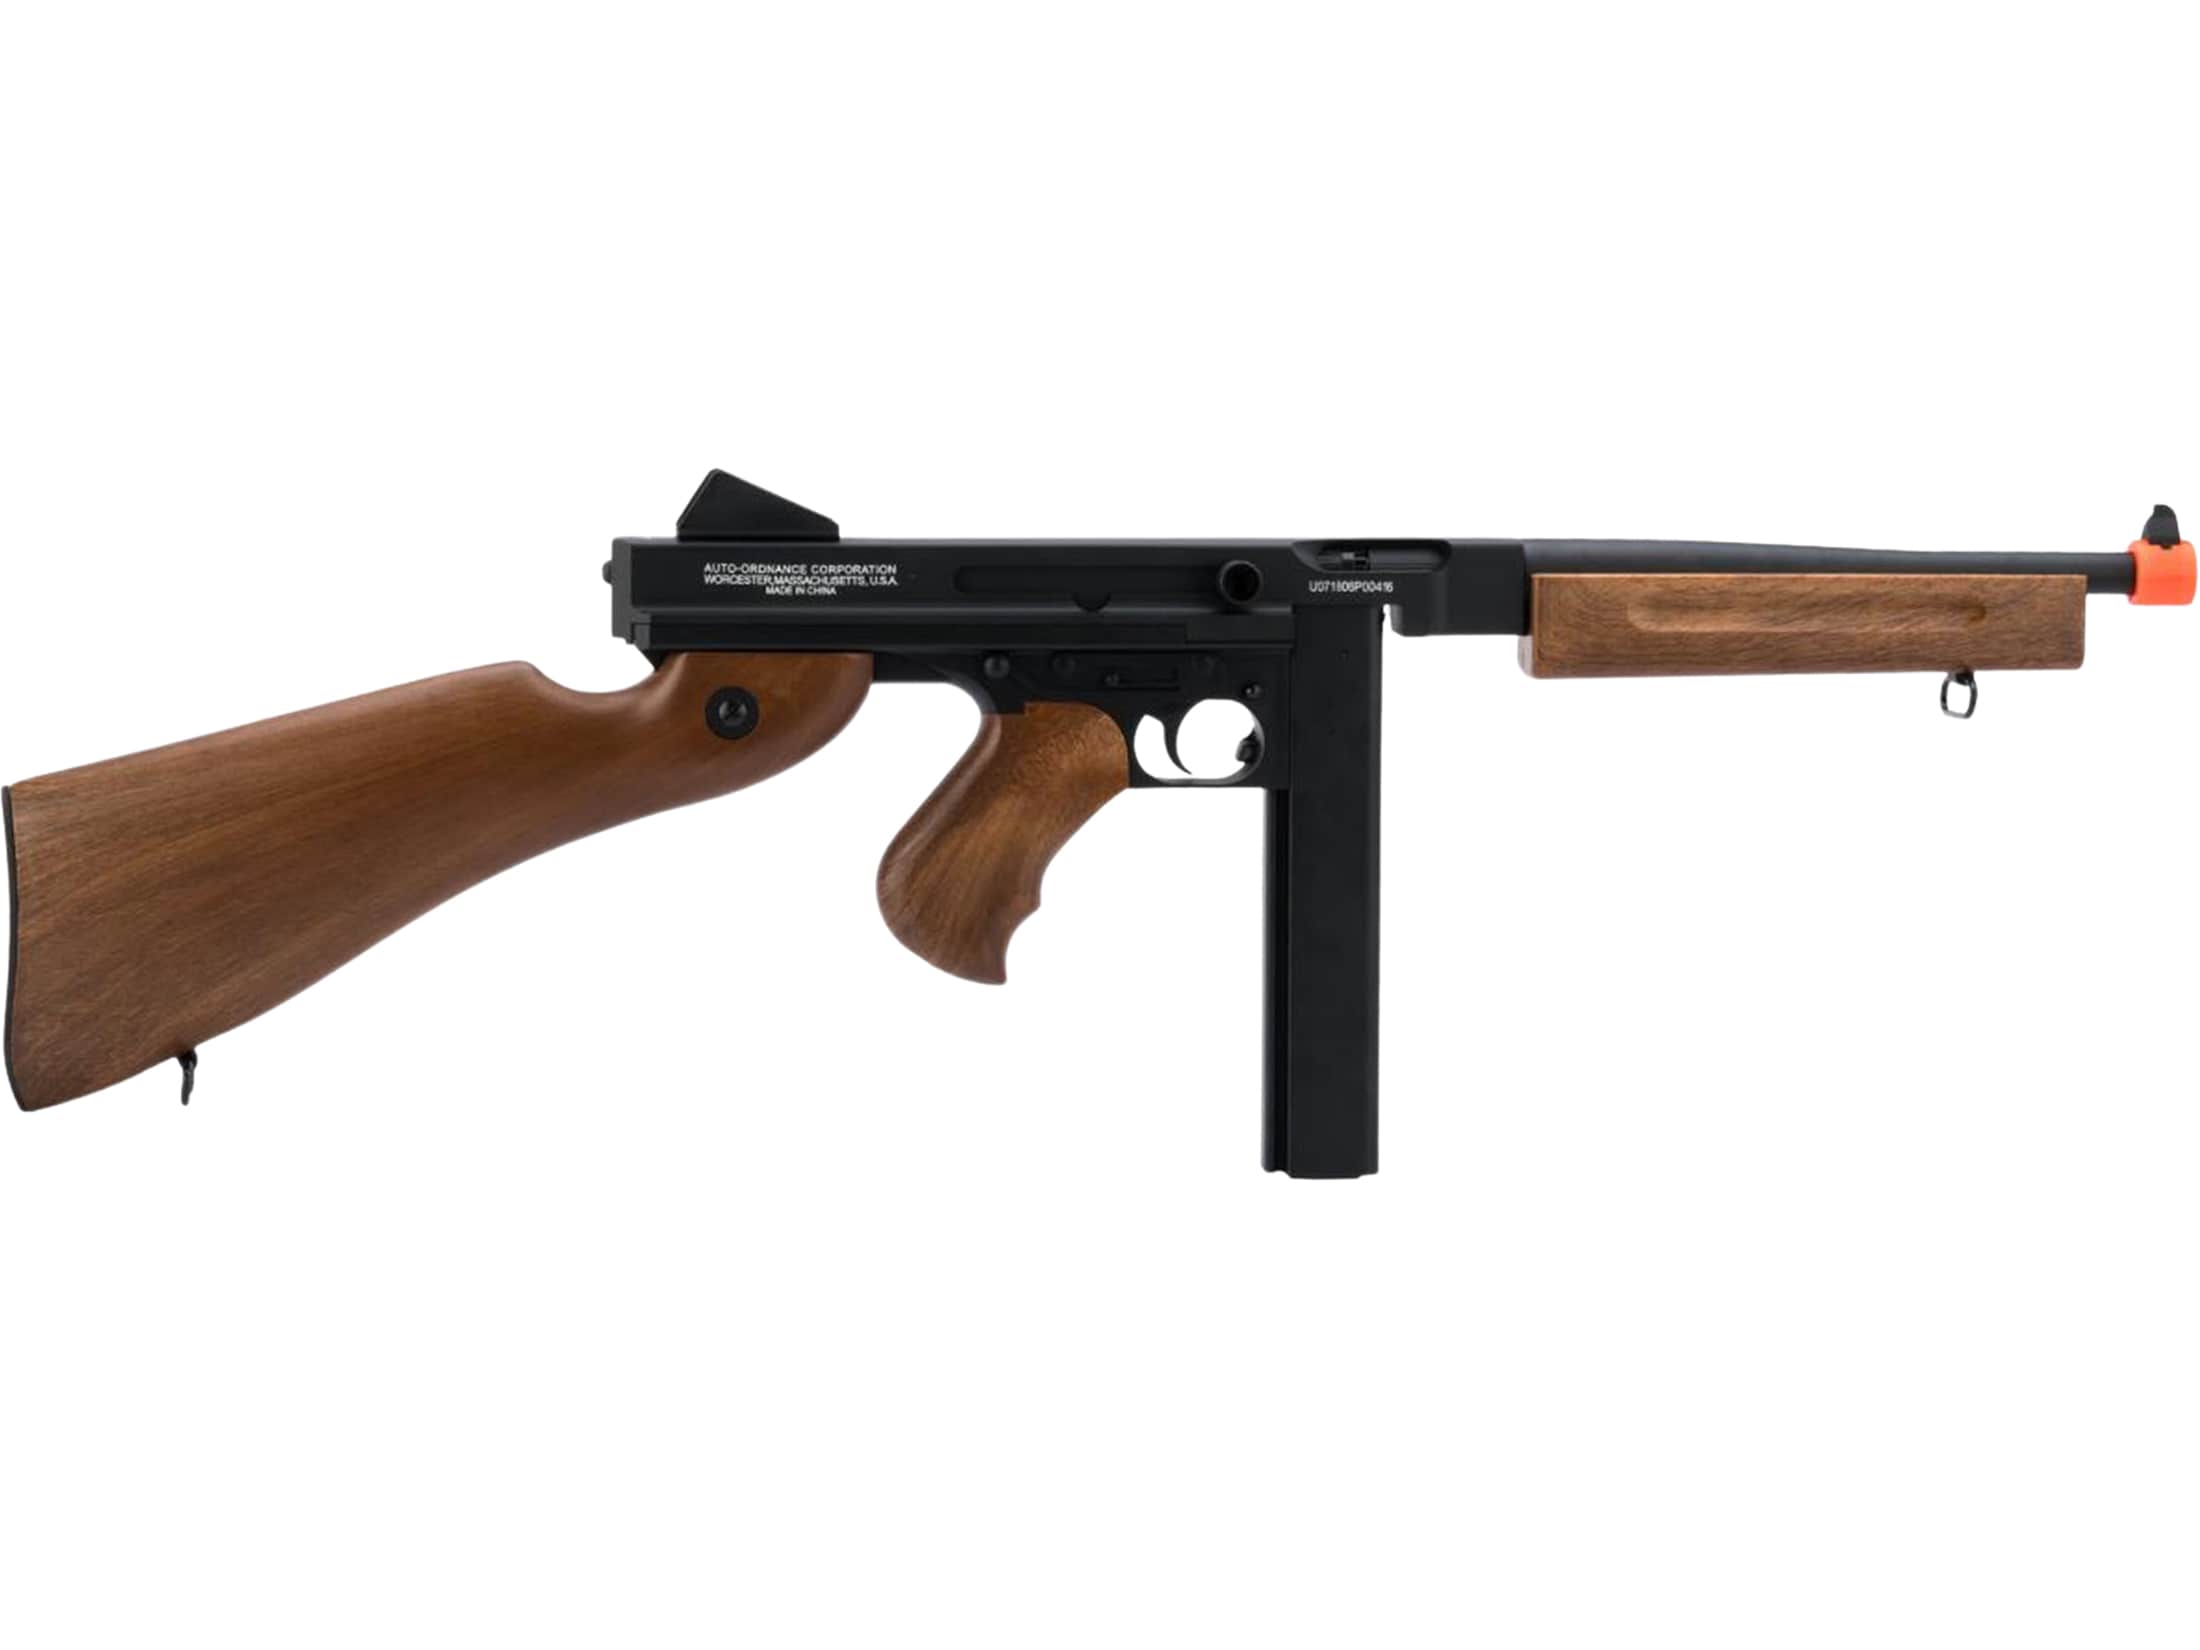 airsoft auto electric rifle thompson m1a1 tommy gun - www.learningelf.com.